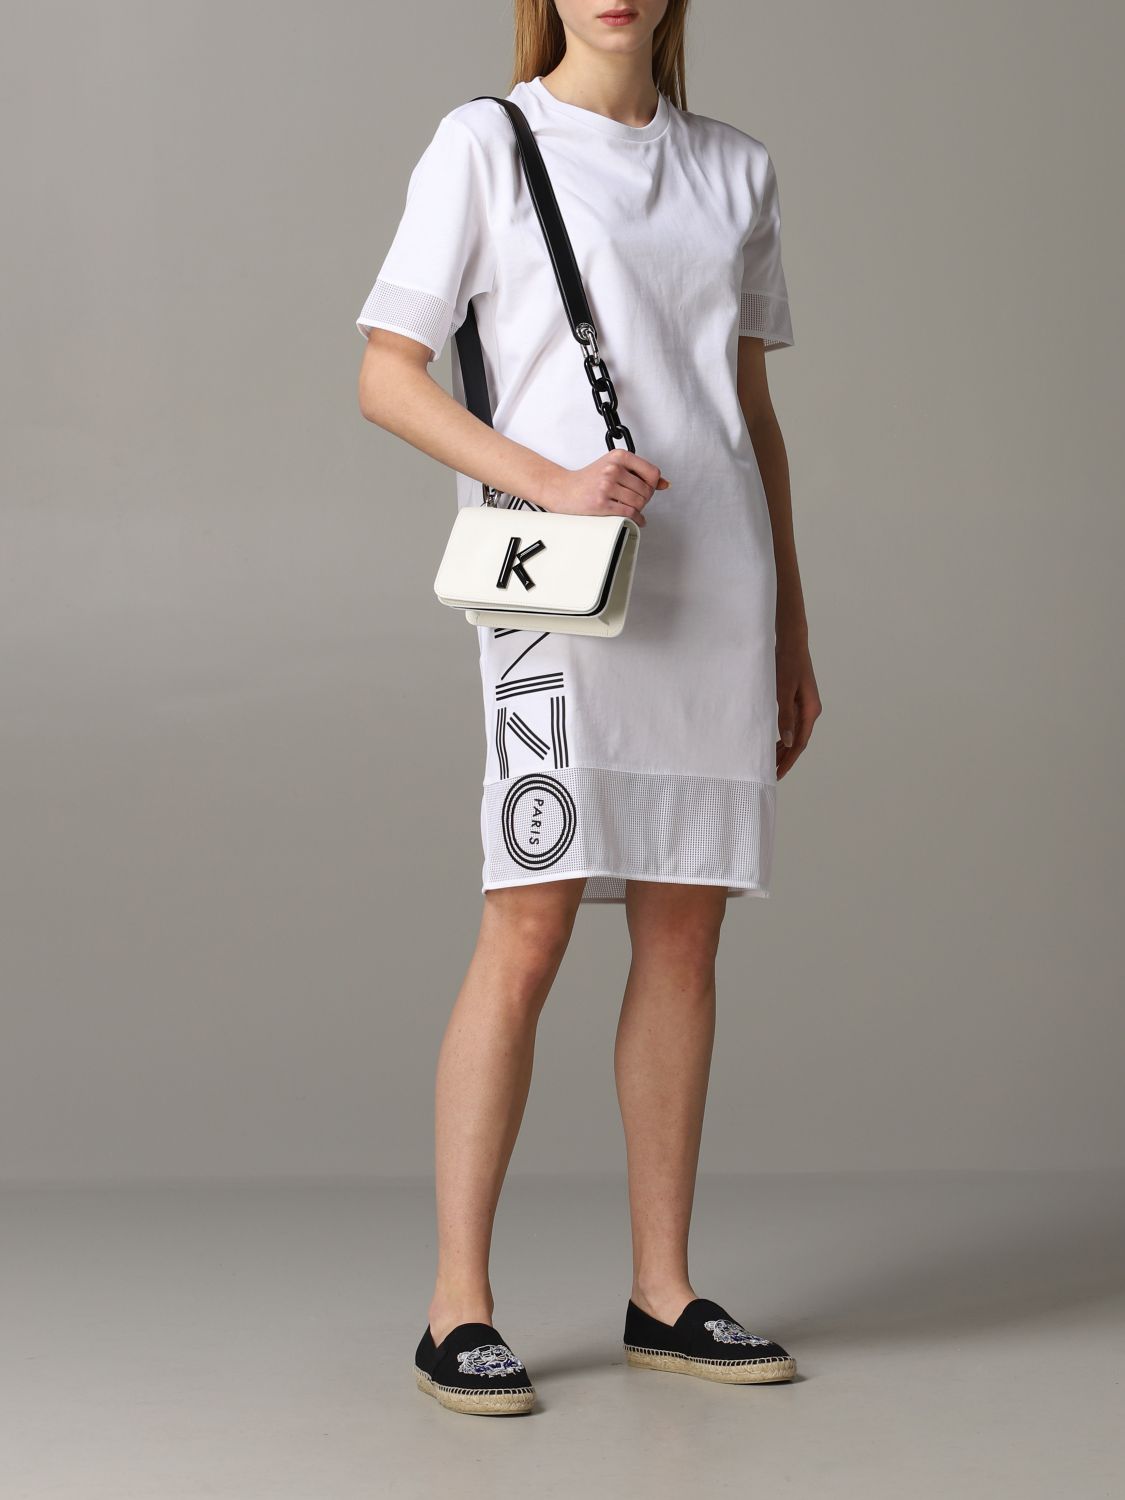 Kenzo Outlet: leather shoulder bag with K monogram - White | Kenzo ...